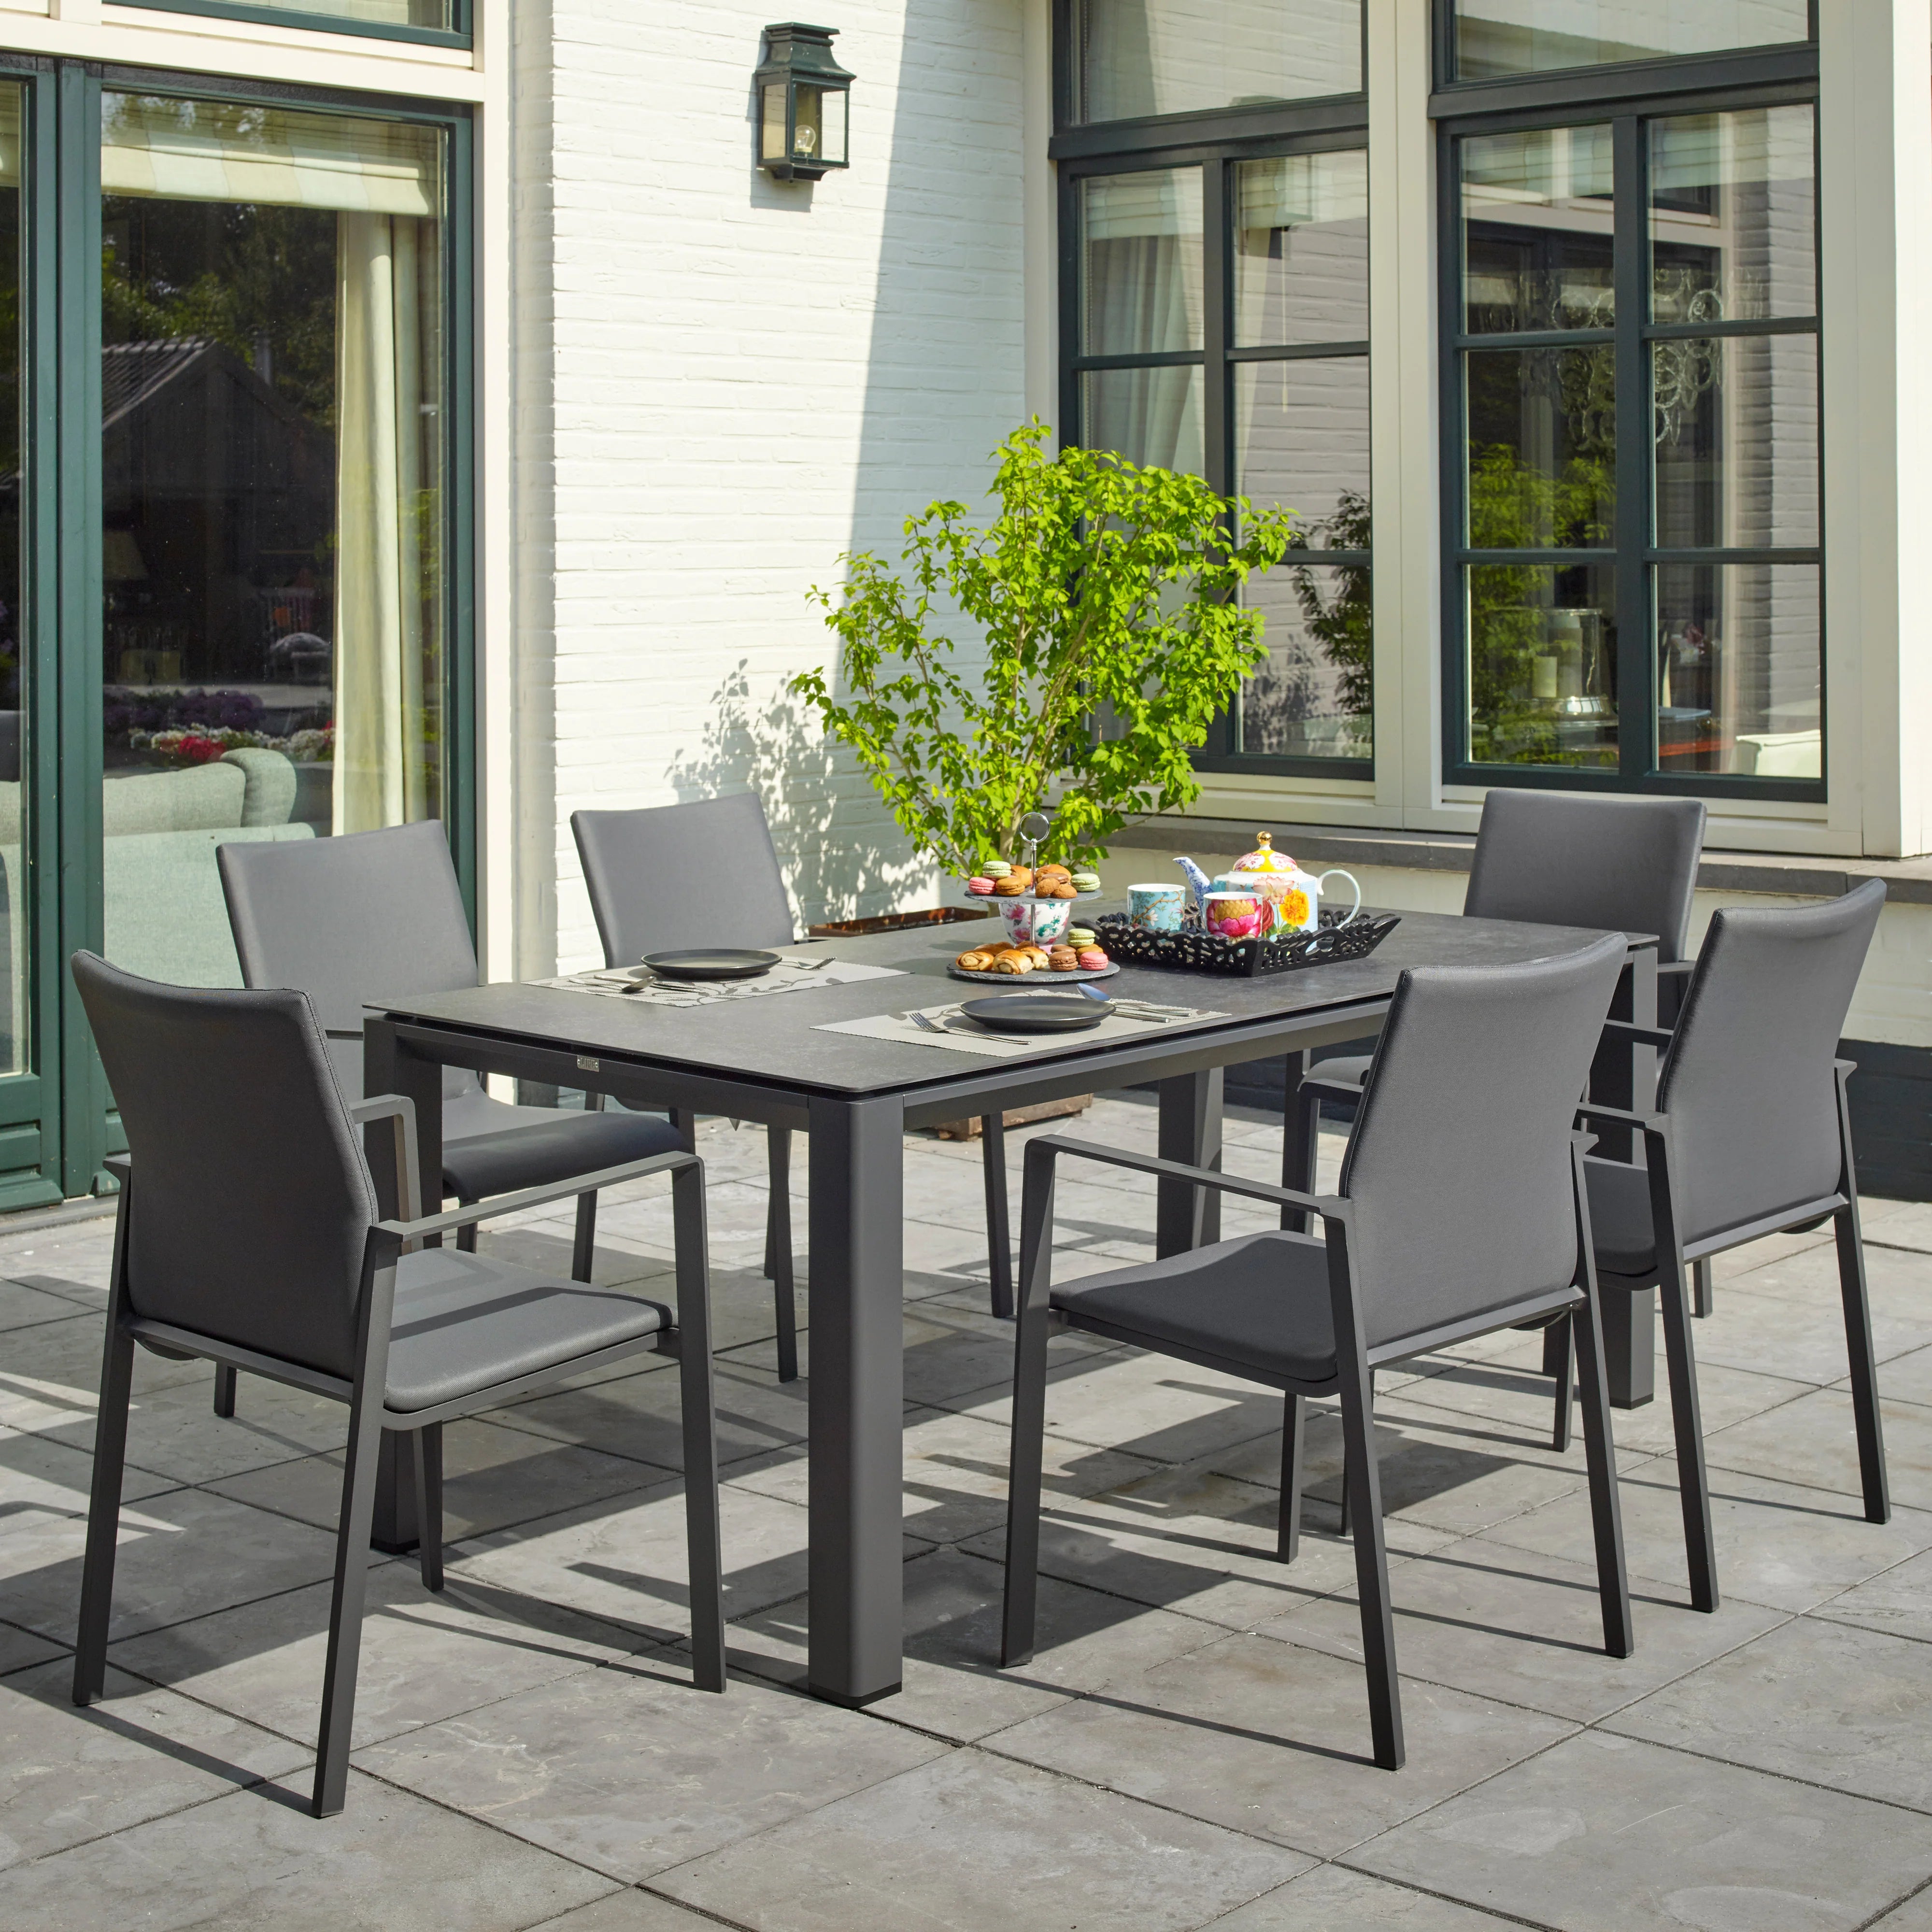 Enjoy the Great Outdoors: Kettler Patio Furniture for Spring and Summer